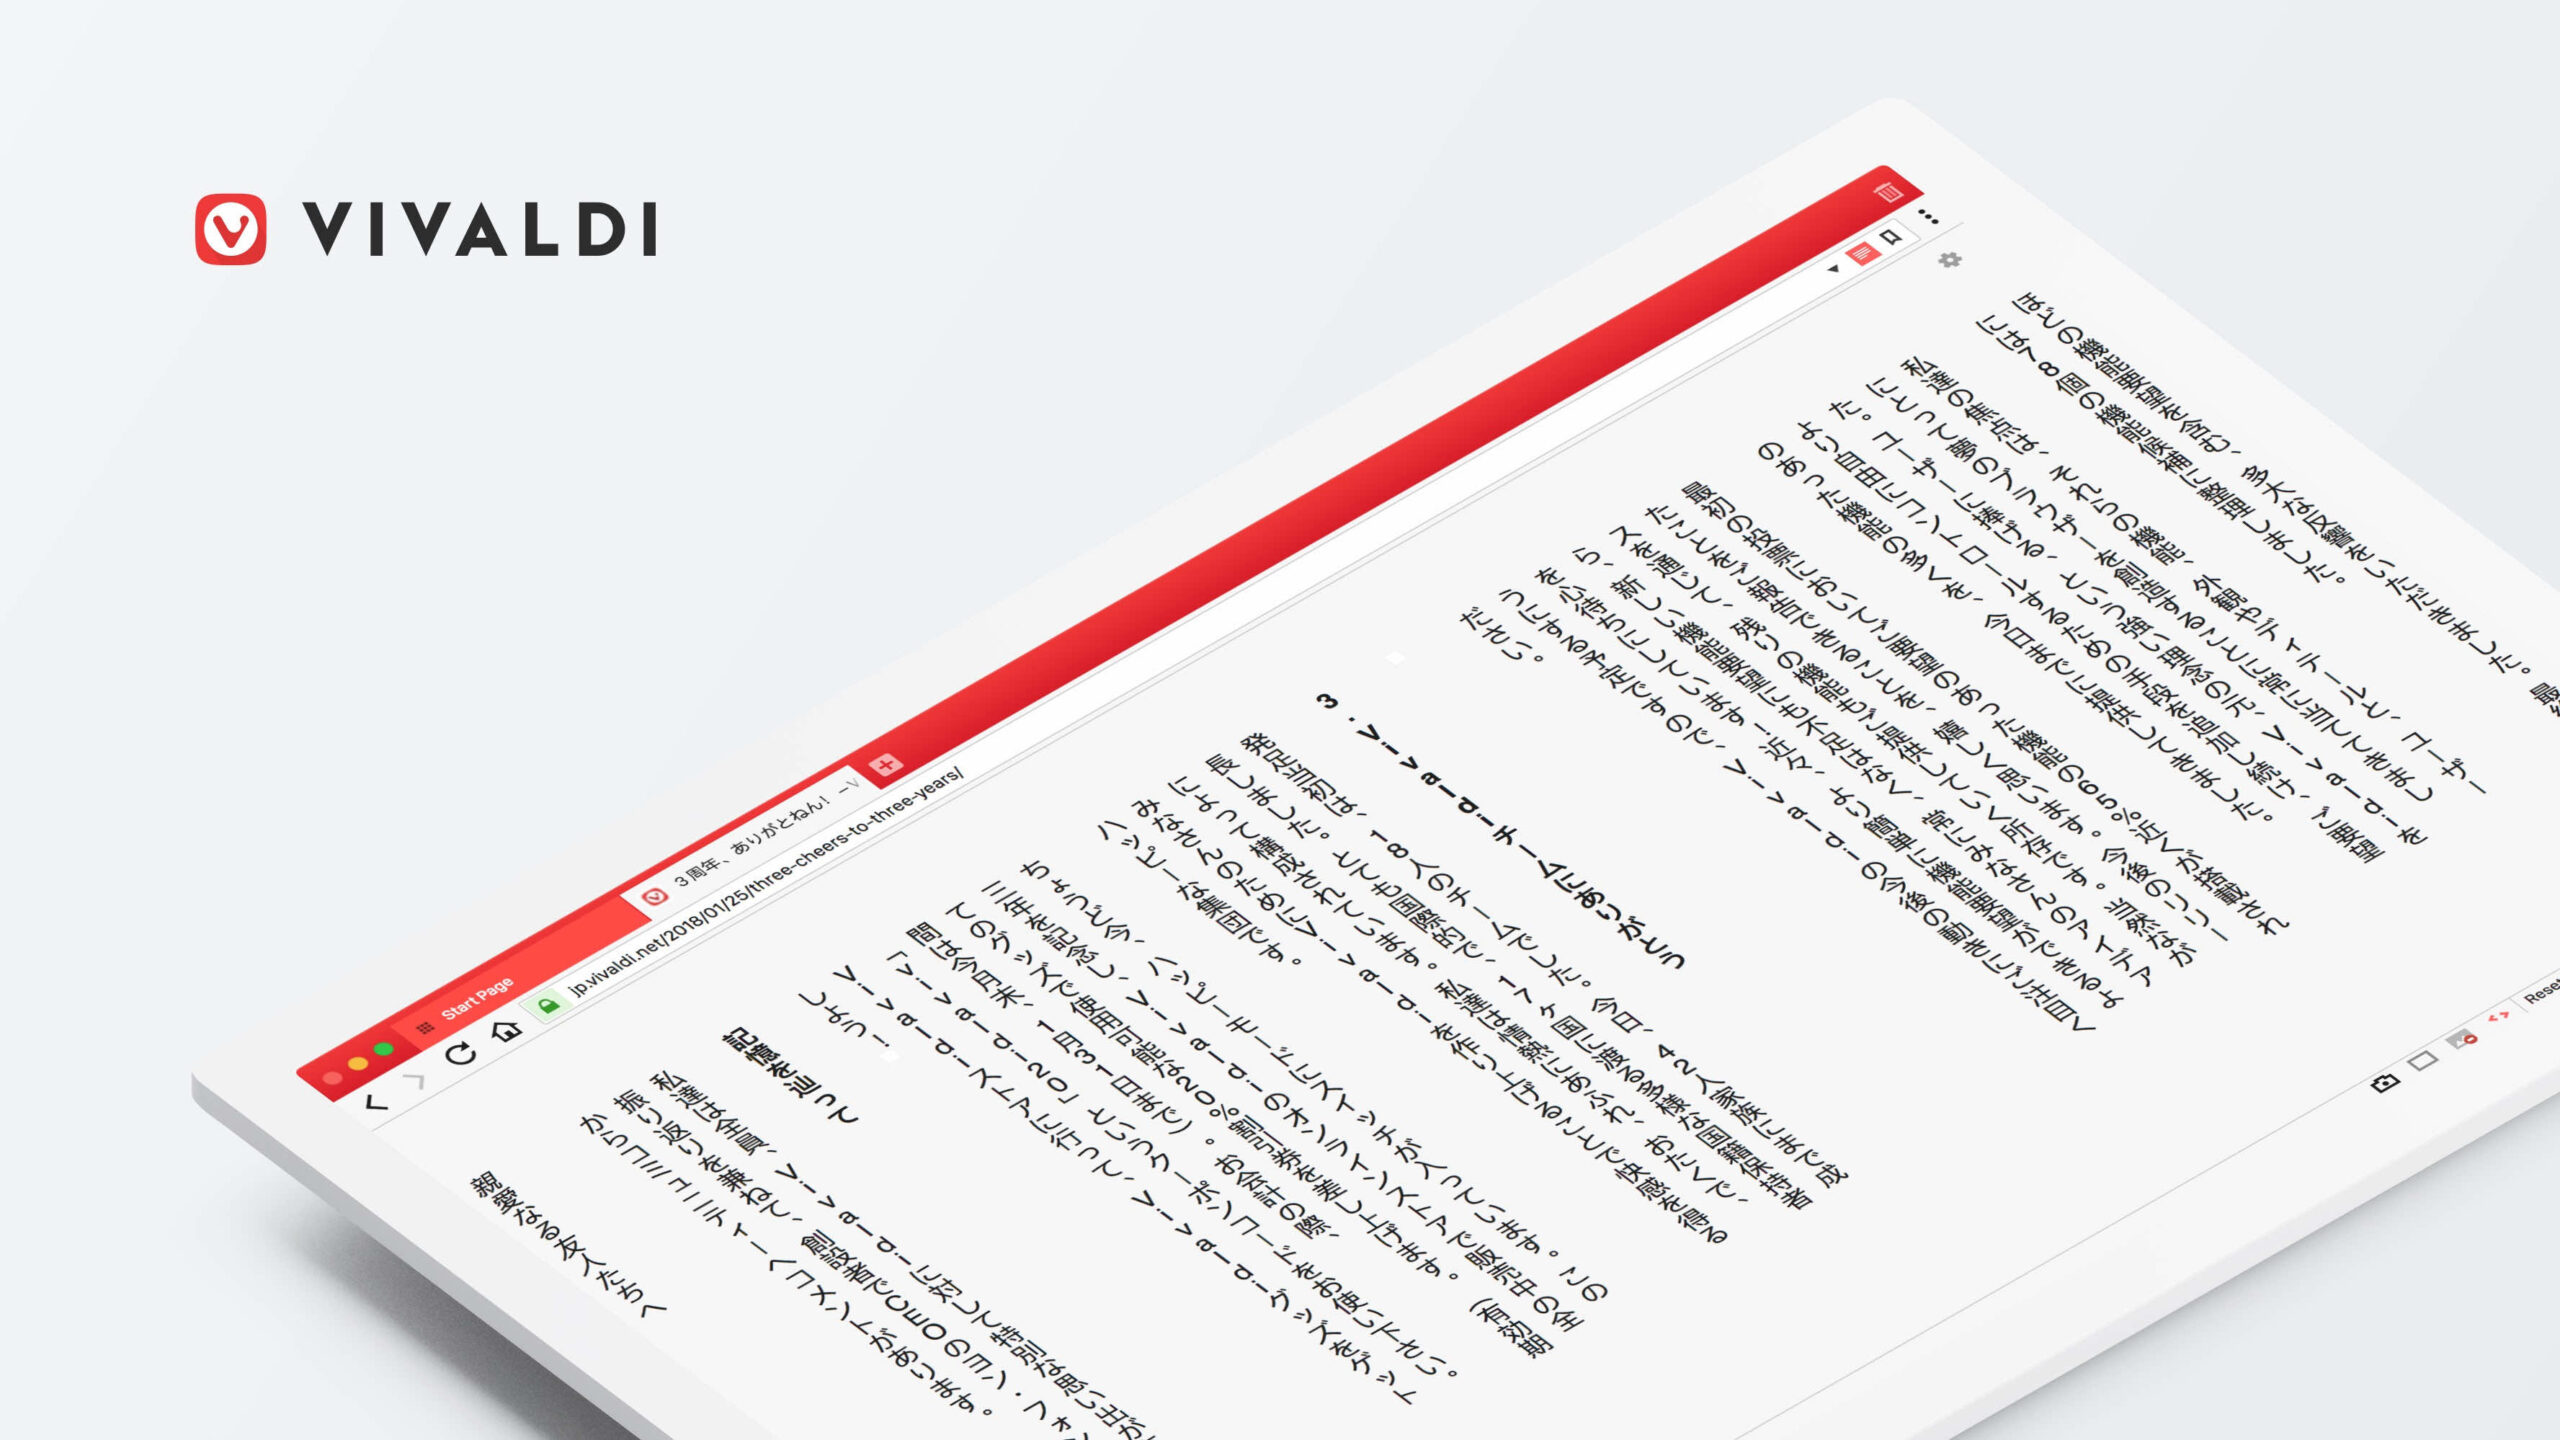 Vivaldi introduces vertical reader mode, a first for browsers